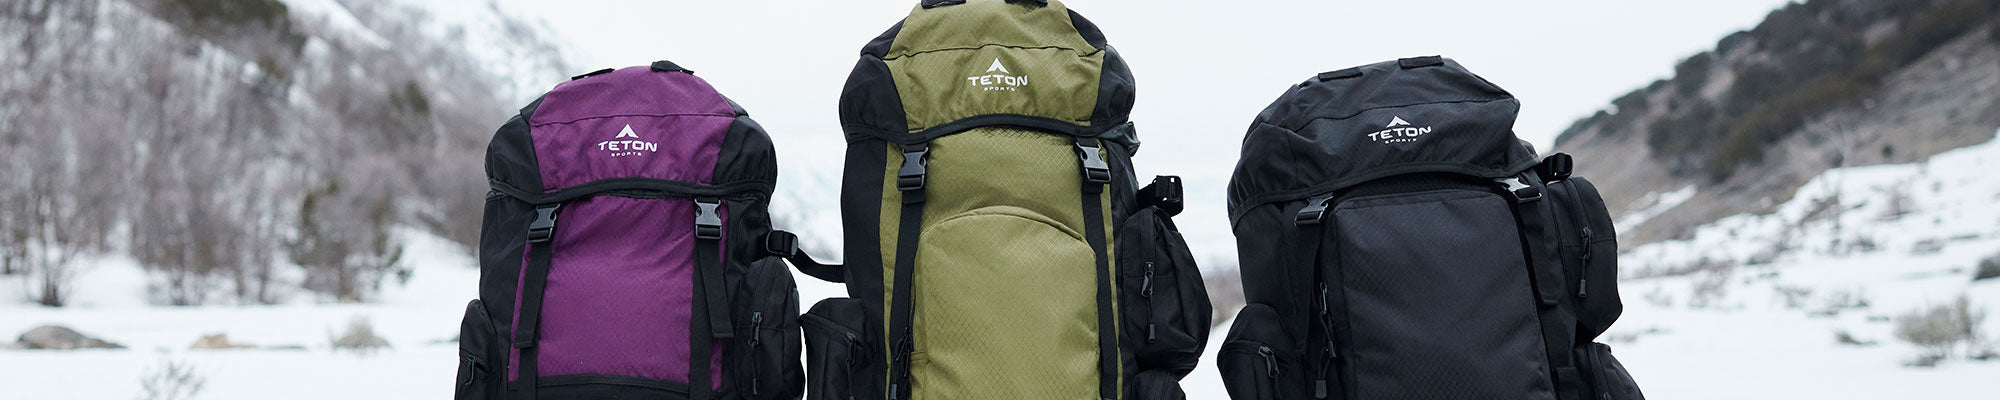 TETON Sports Scout & Explorer backpacks in a snowy setting.